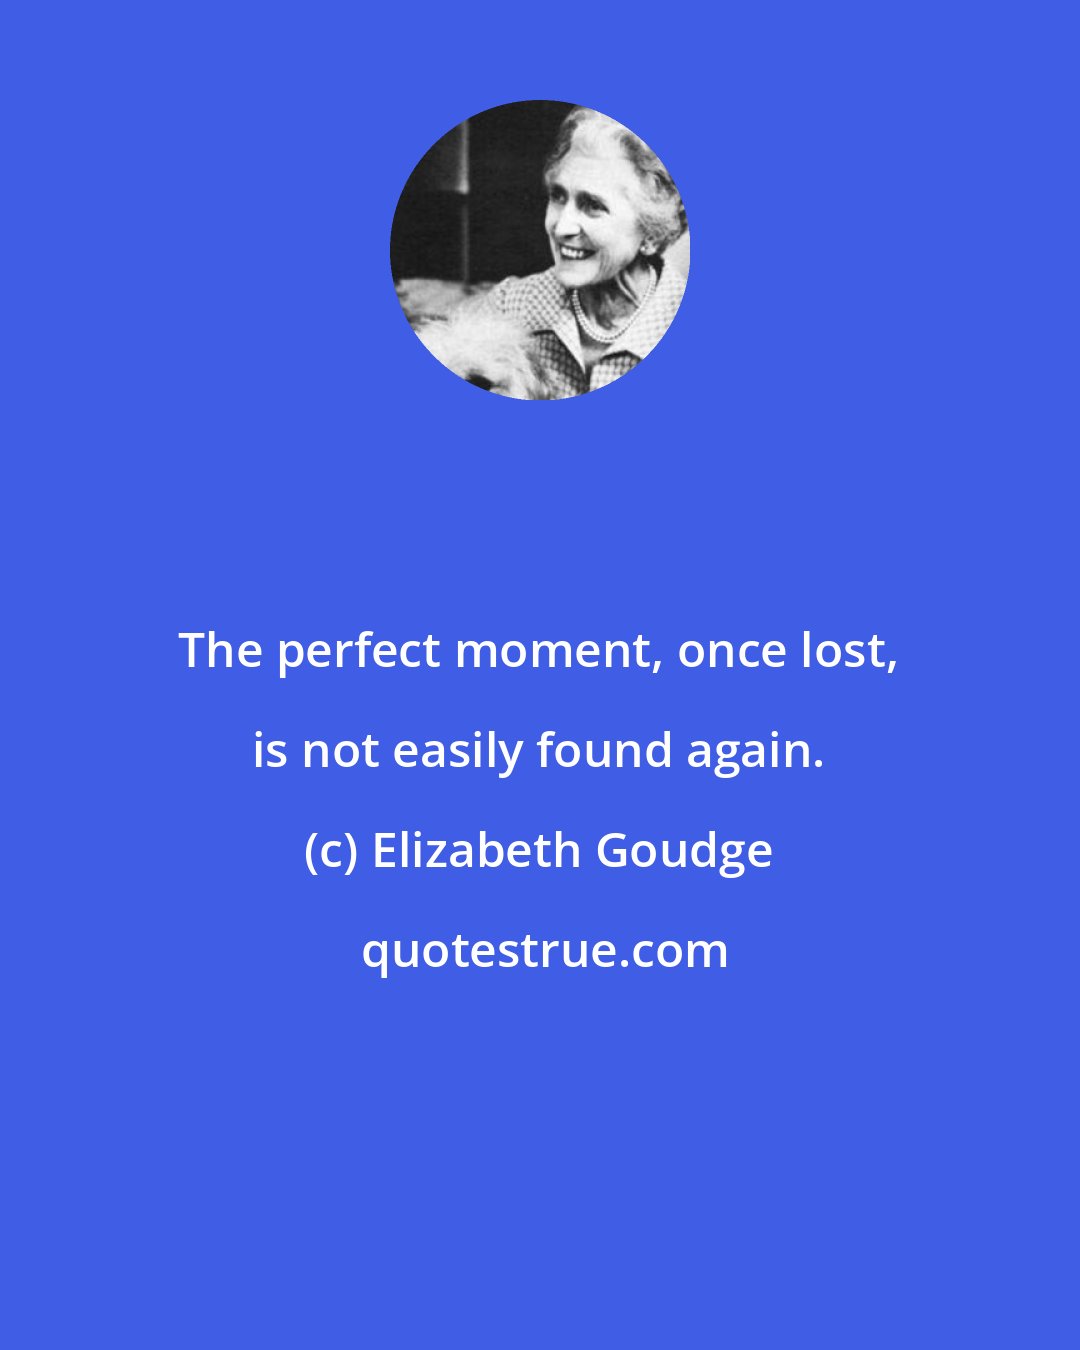 Elizabeth Goudge: The perfect moment, once lost, is not easily found again.